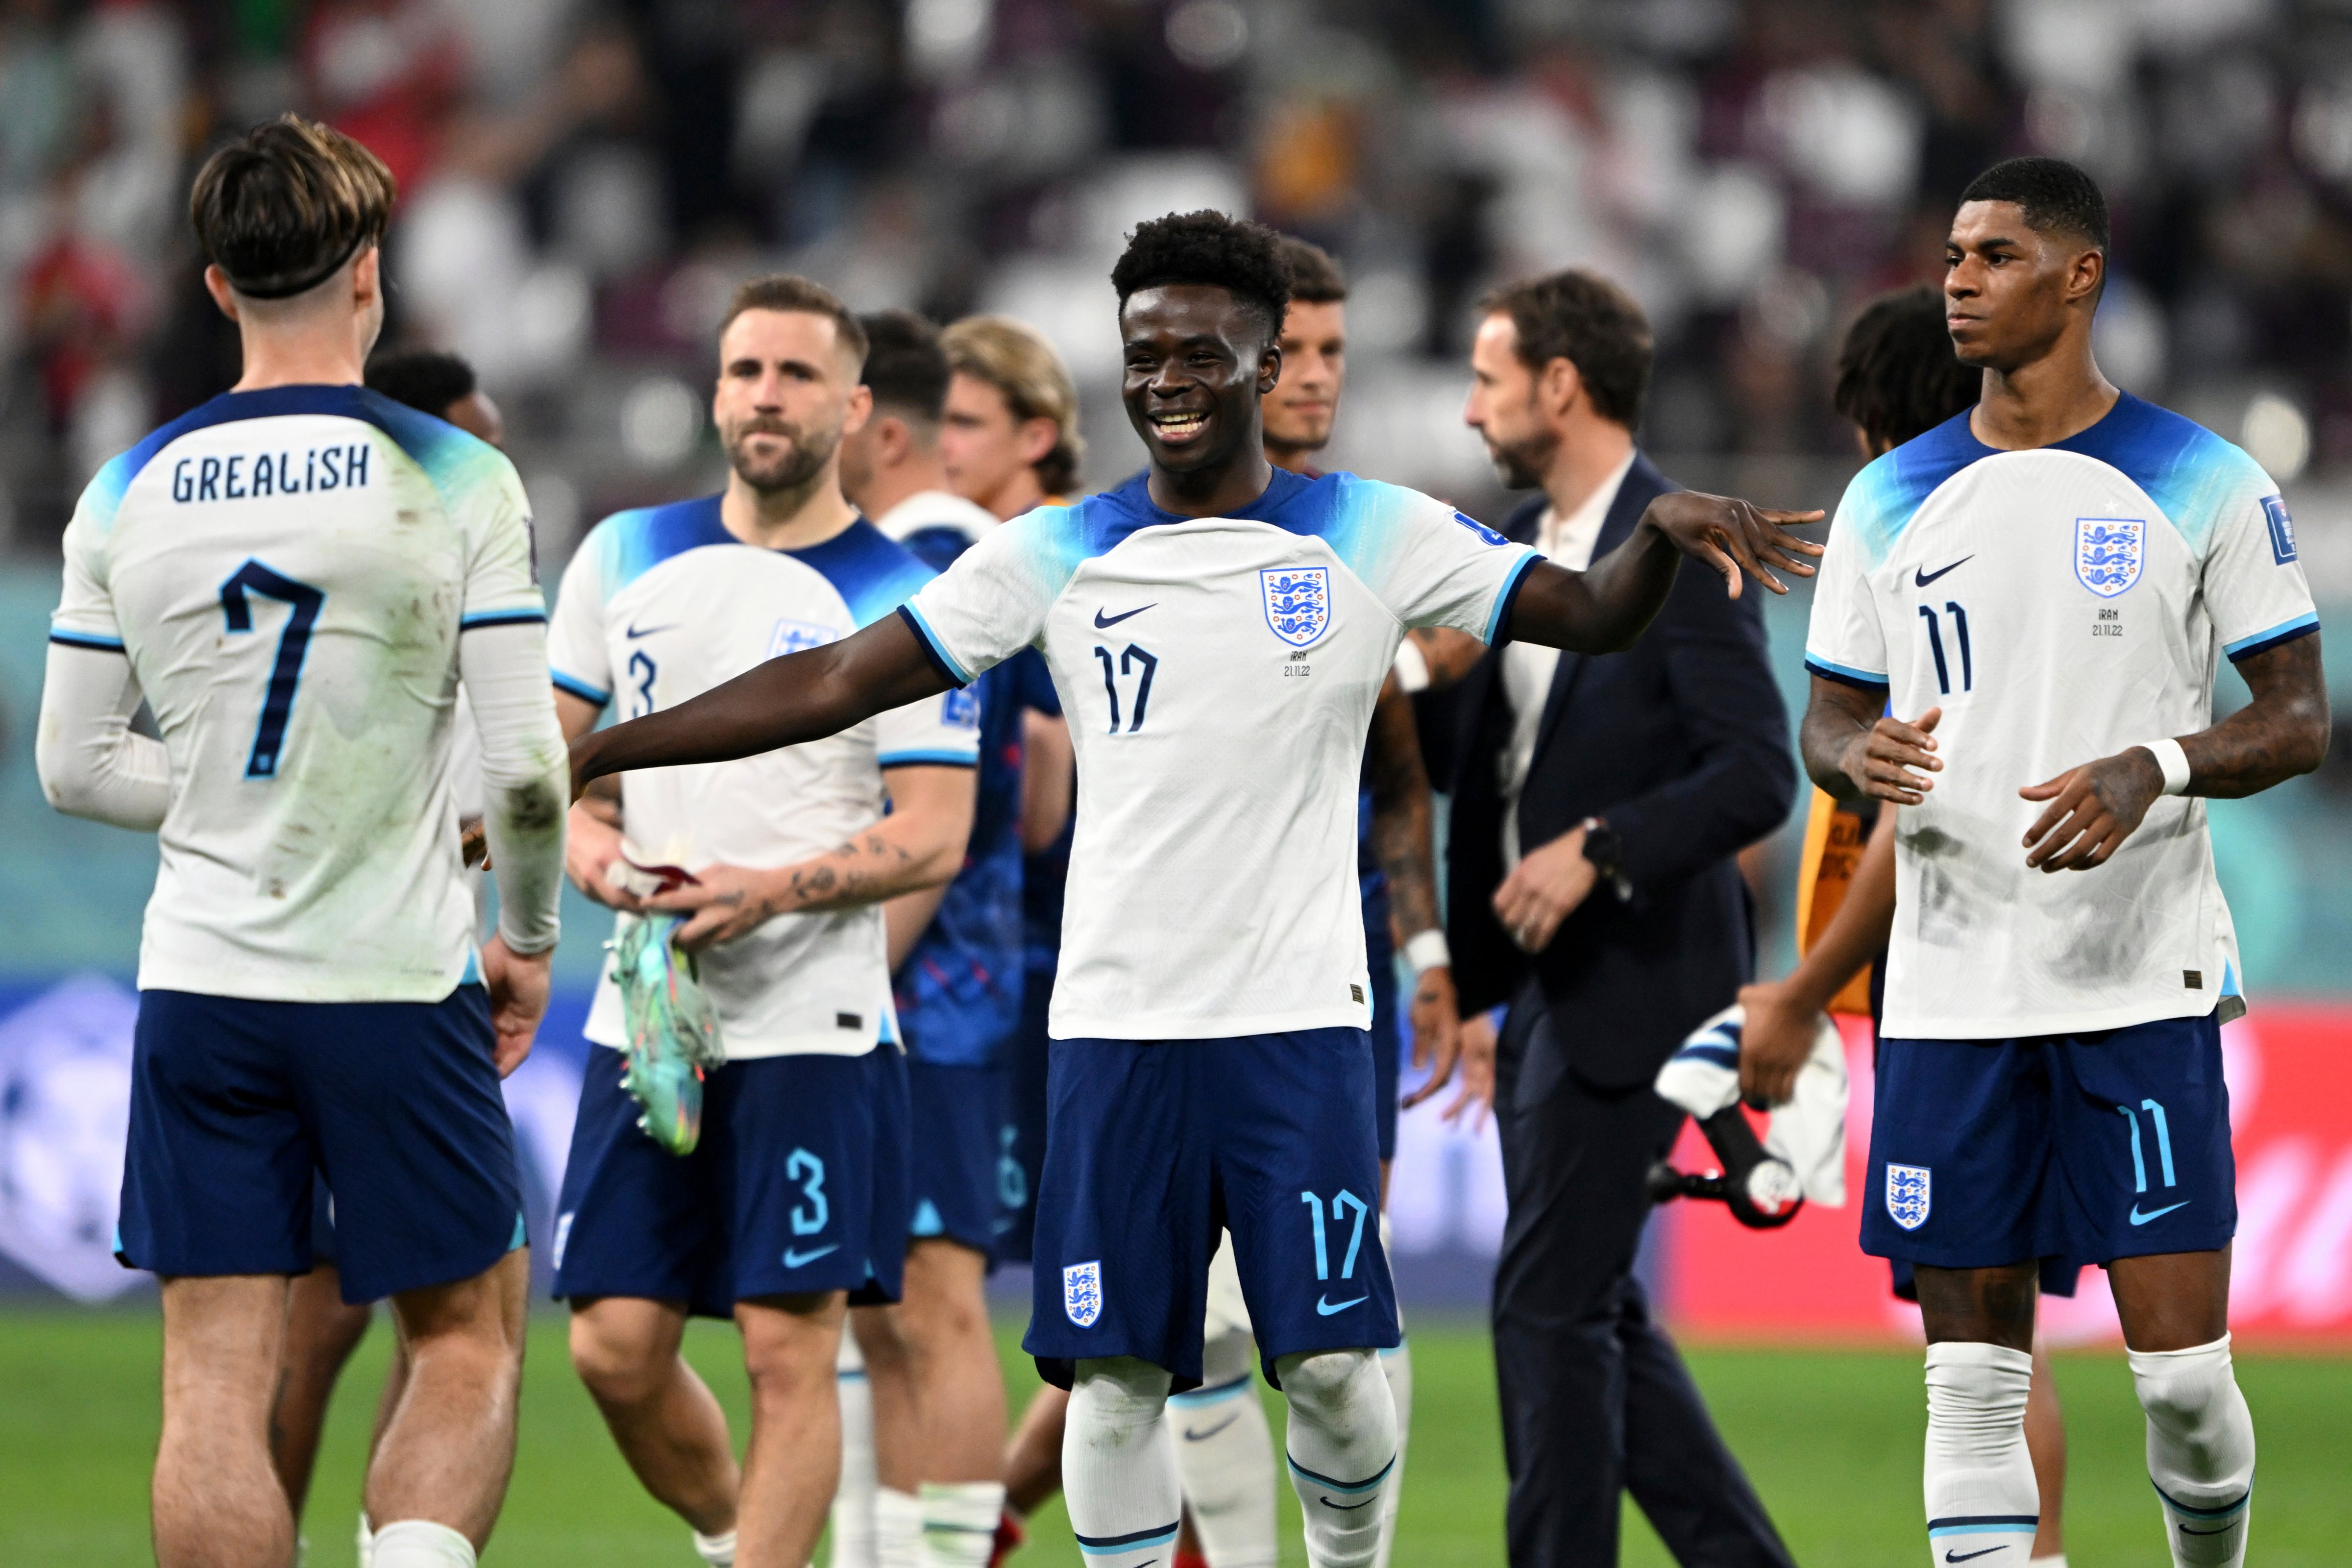 England's Bukayo Saka applauds after the final whistle, after scoring two of the Three Lions' six goals against Iran.  Coach Gareth Southgate walks in the background, at Qatar's Chalifa International Stadium, November 21, 2022. (Robert Michael—picture-alliance/dpa/AP)